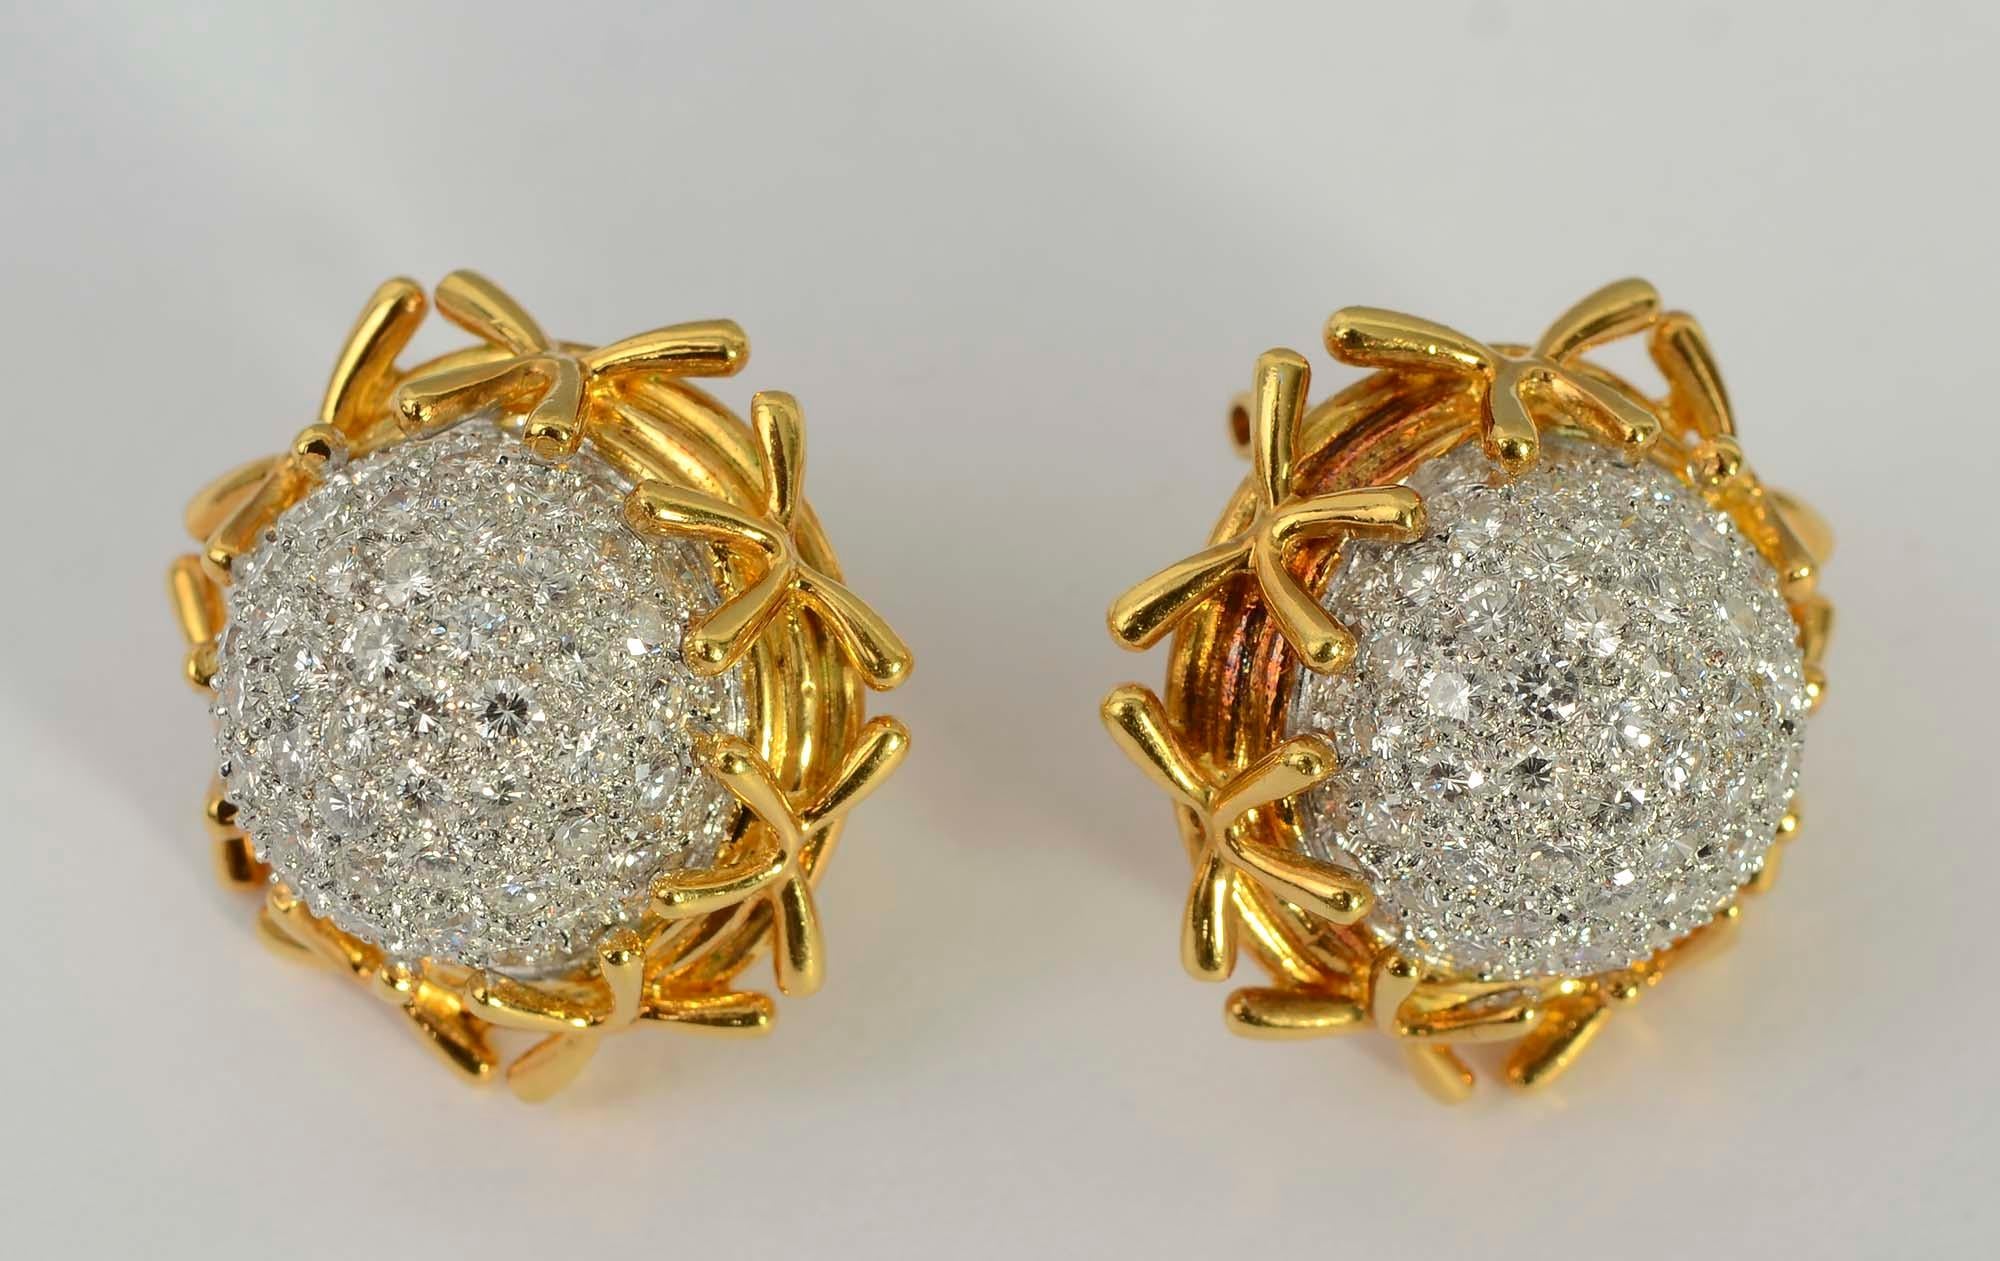 Elegant dome shaped diamond earrings nested in gold banding and gold criss crosses.
The earrings have 128 diamonds with a total weight of approximately 5 carats. The stones are VS quality; H color. The earrings are signed KS. 
Backs are posts and